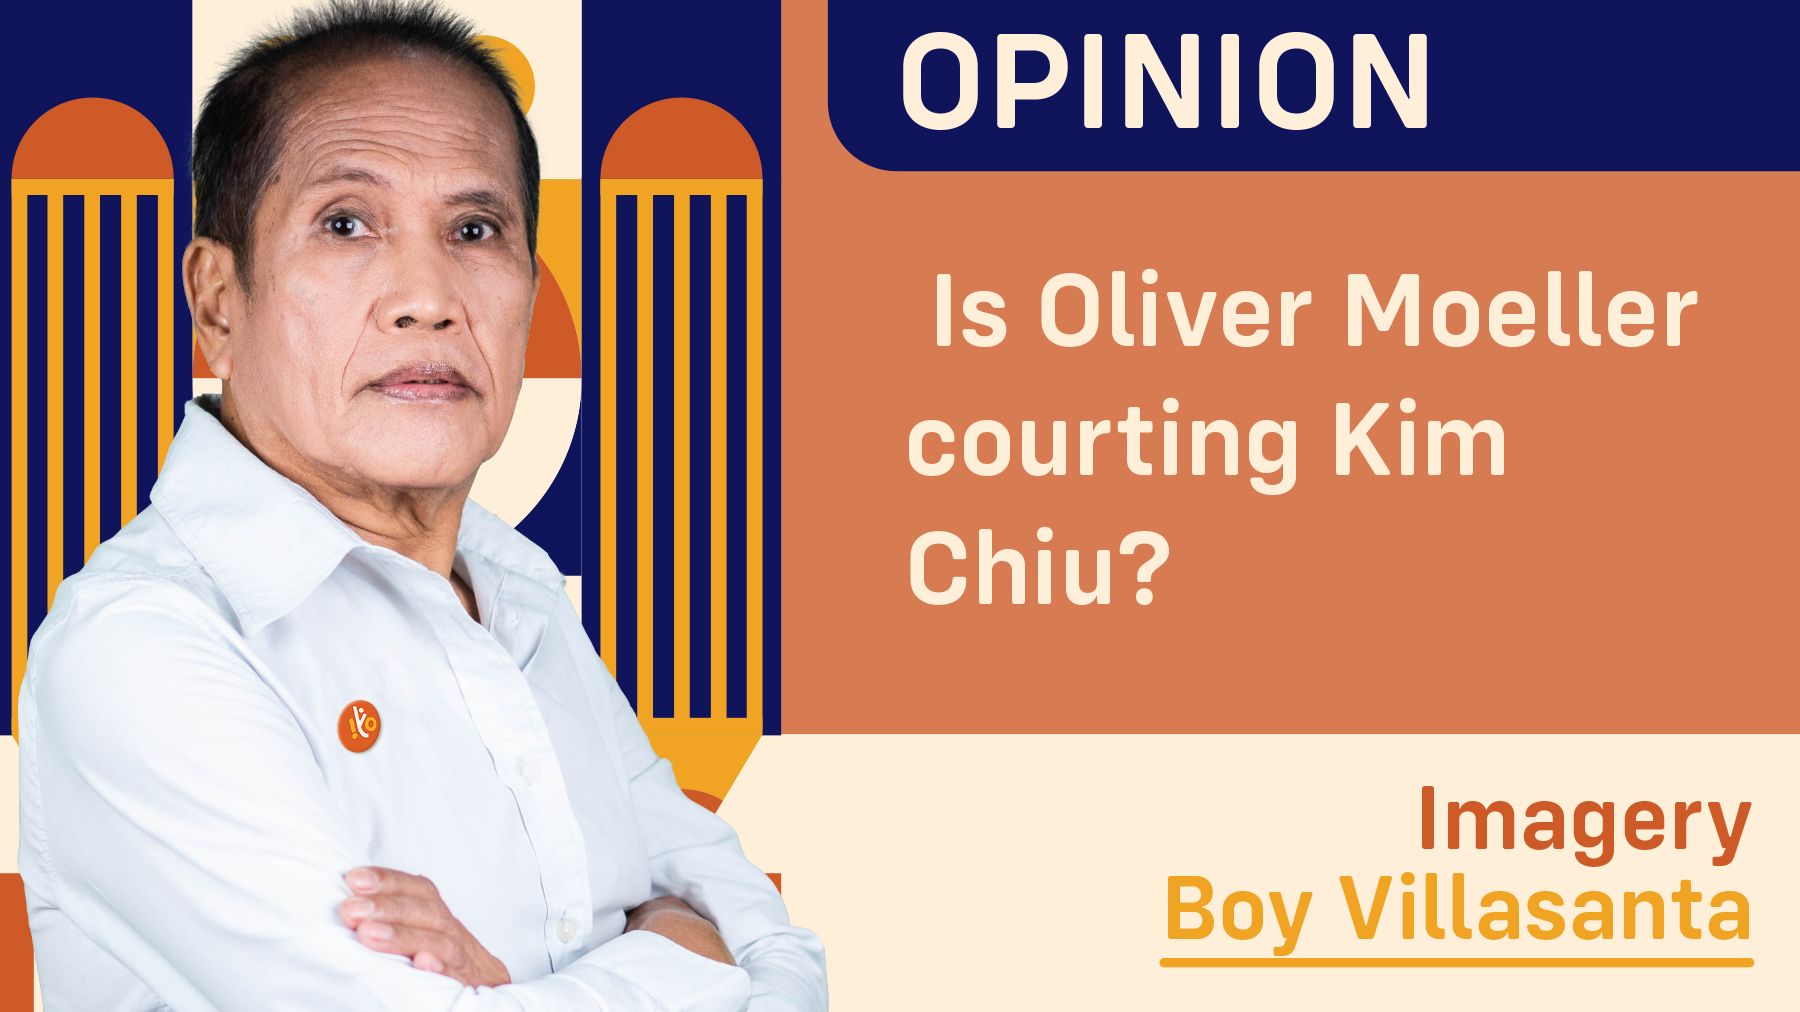 Is Oliver Moeller courting Kim Chiu?